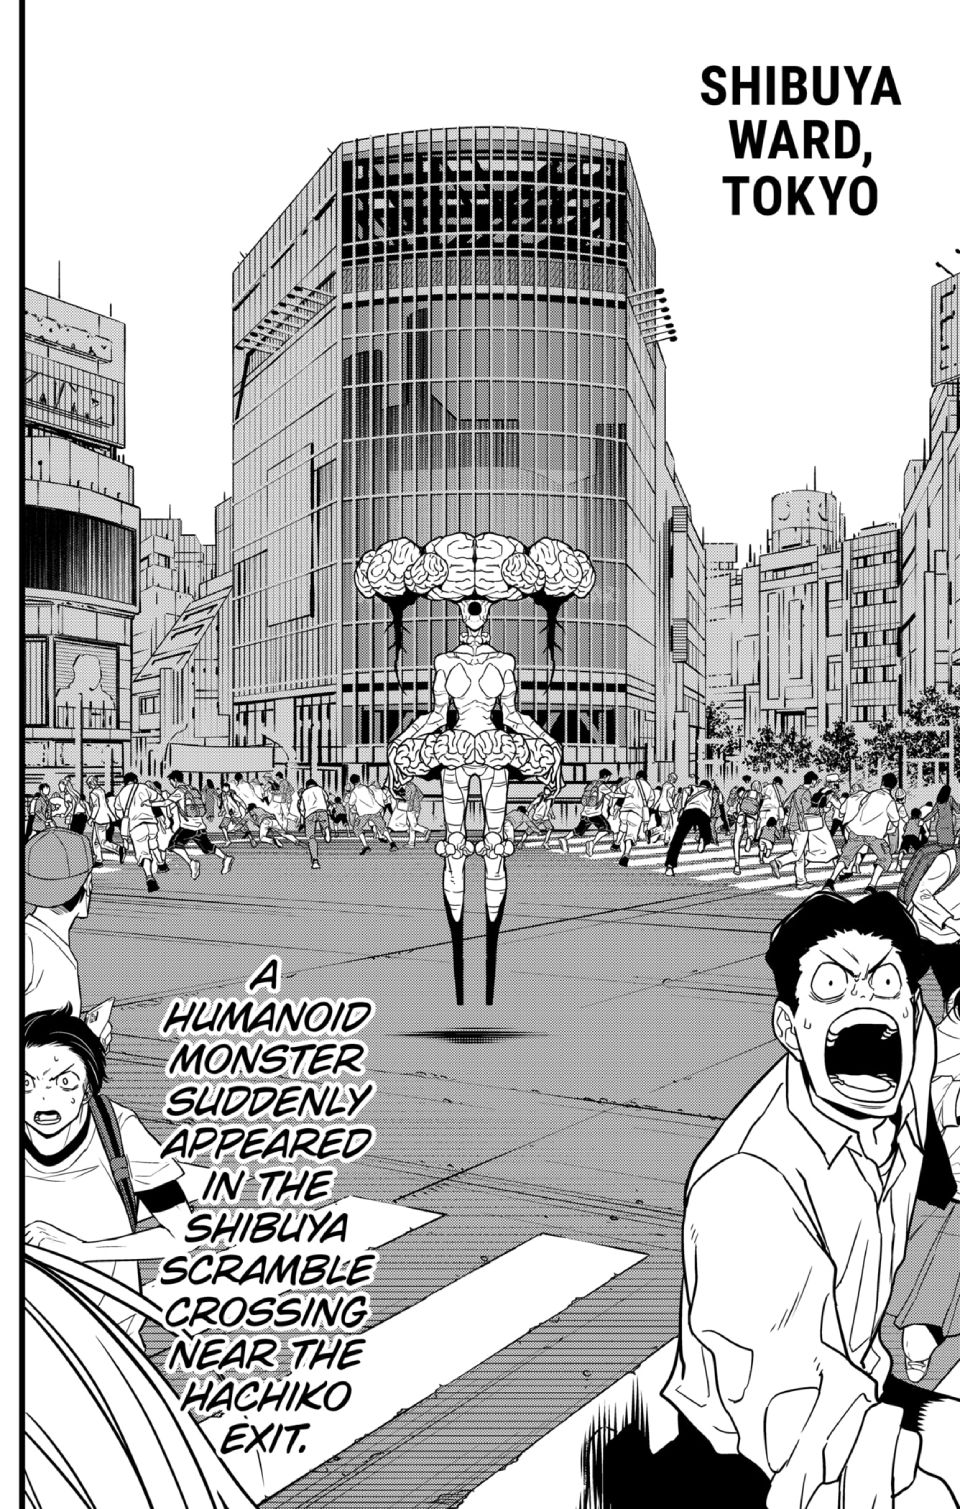 Kaiju No. 8 Chapter 68, monster #8 chapter 68